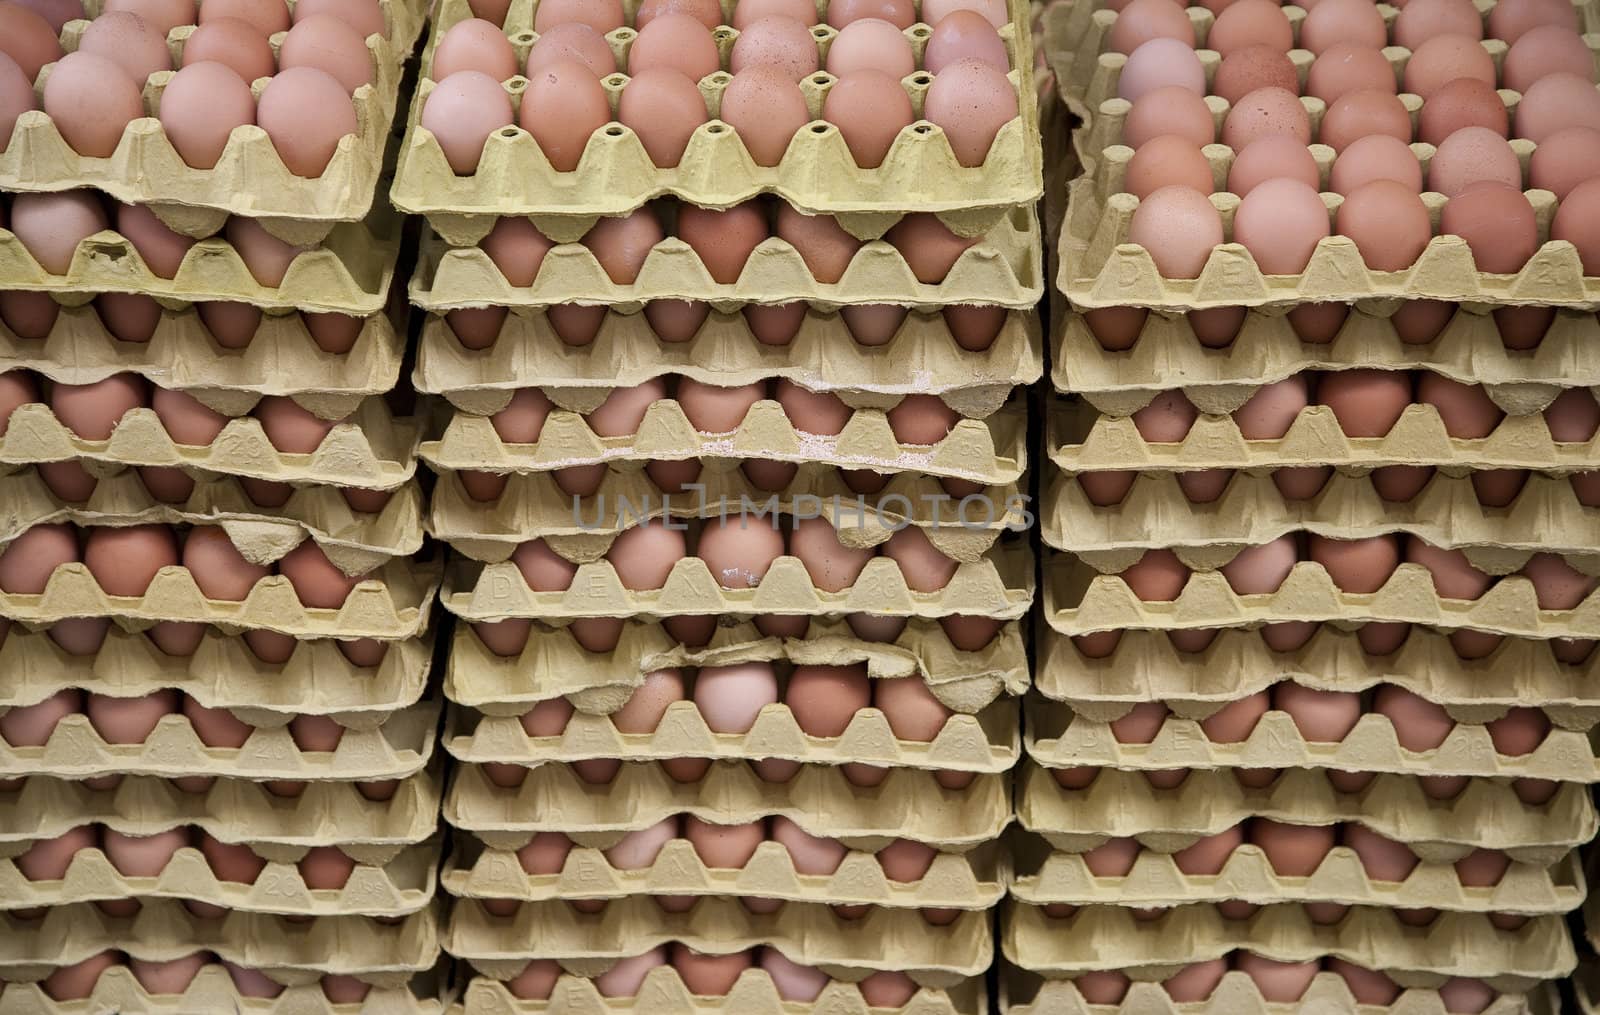 Hundreds of fresh eggs for sale on an urban Istanbul food market.